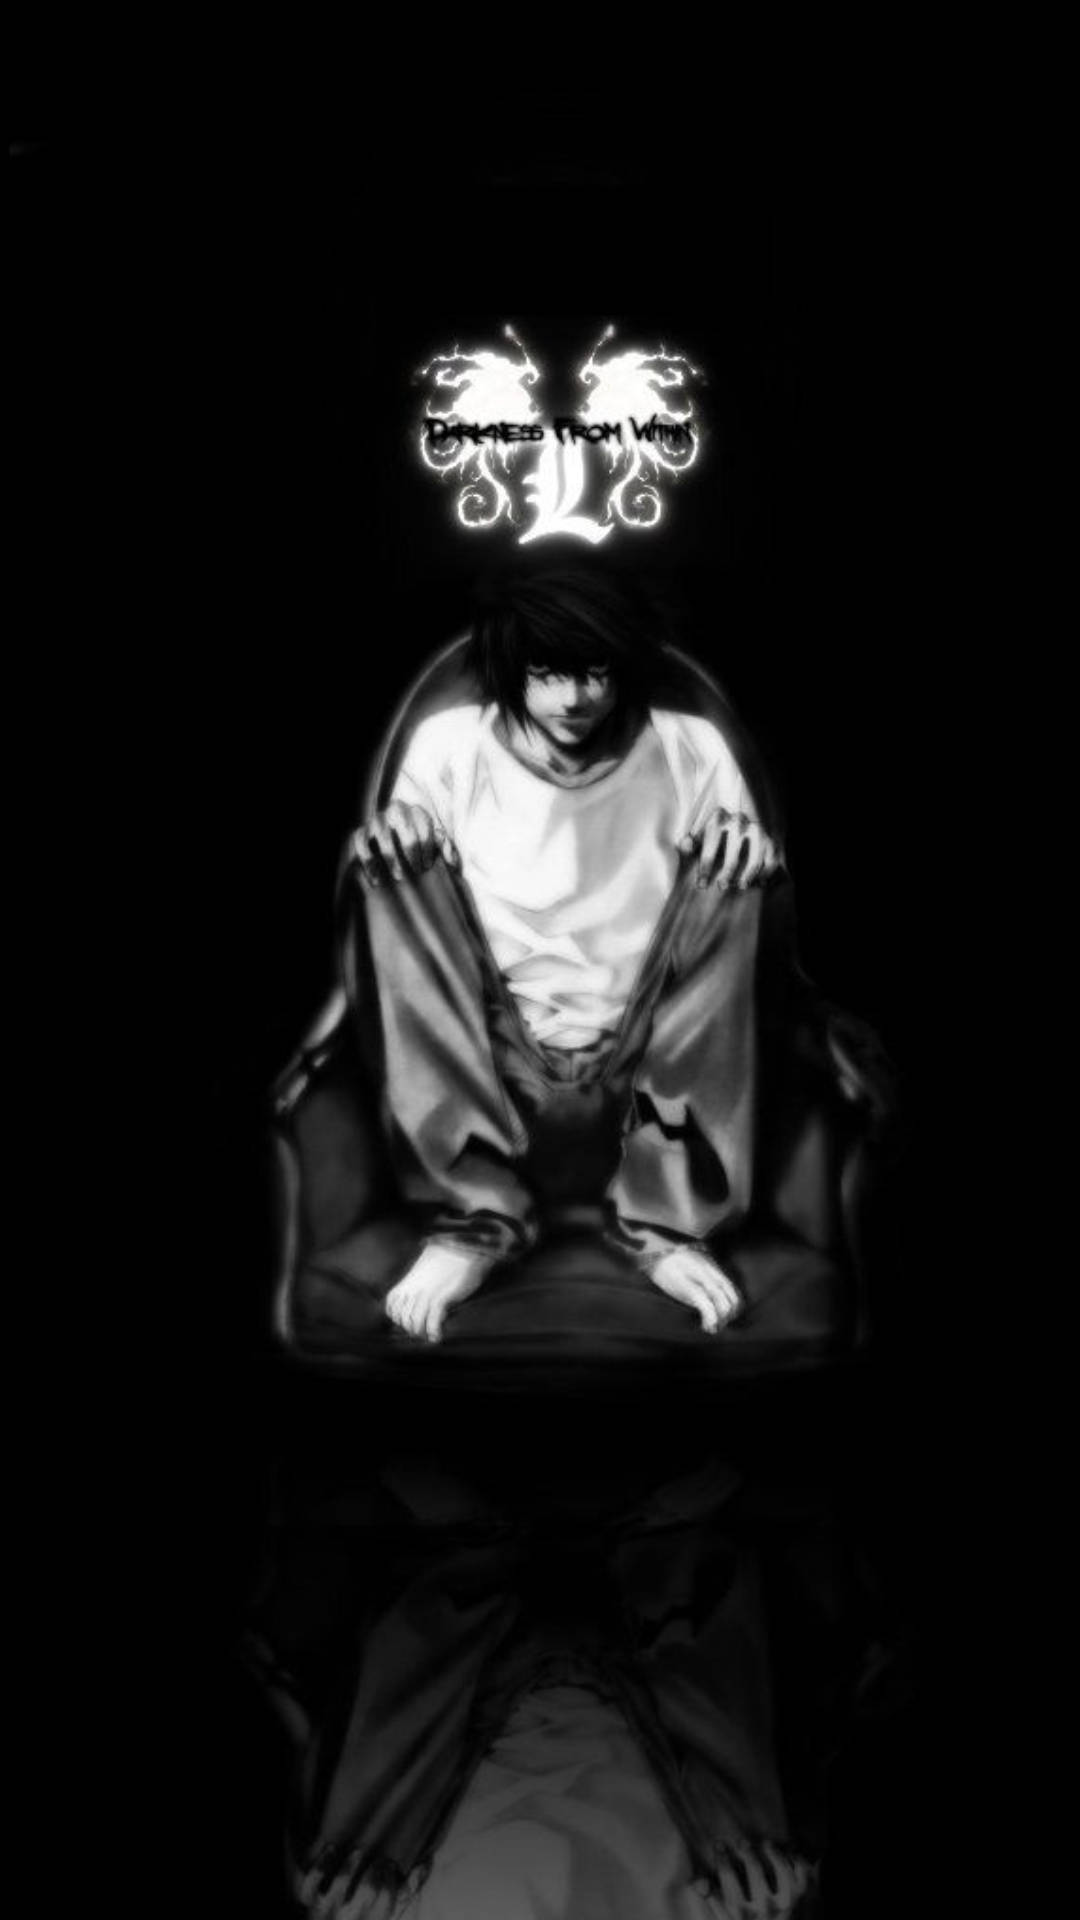 Lawliet Sitting On Chair Death Note iPhone Wallpaper